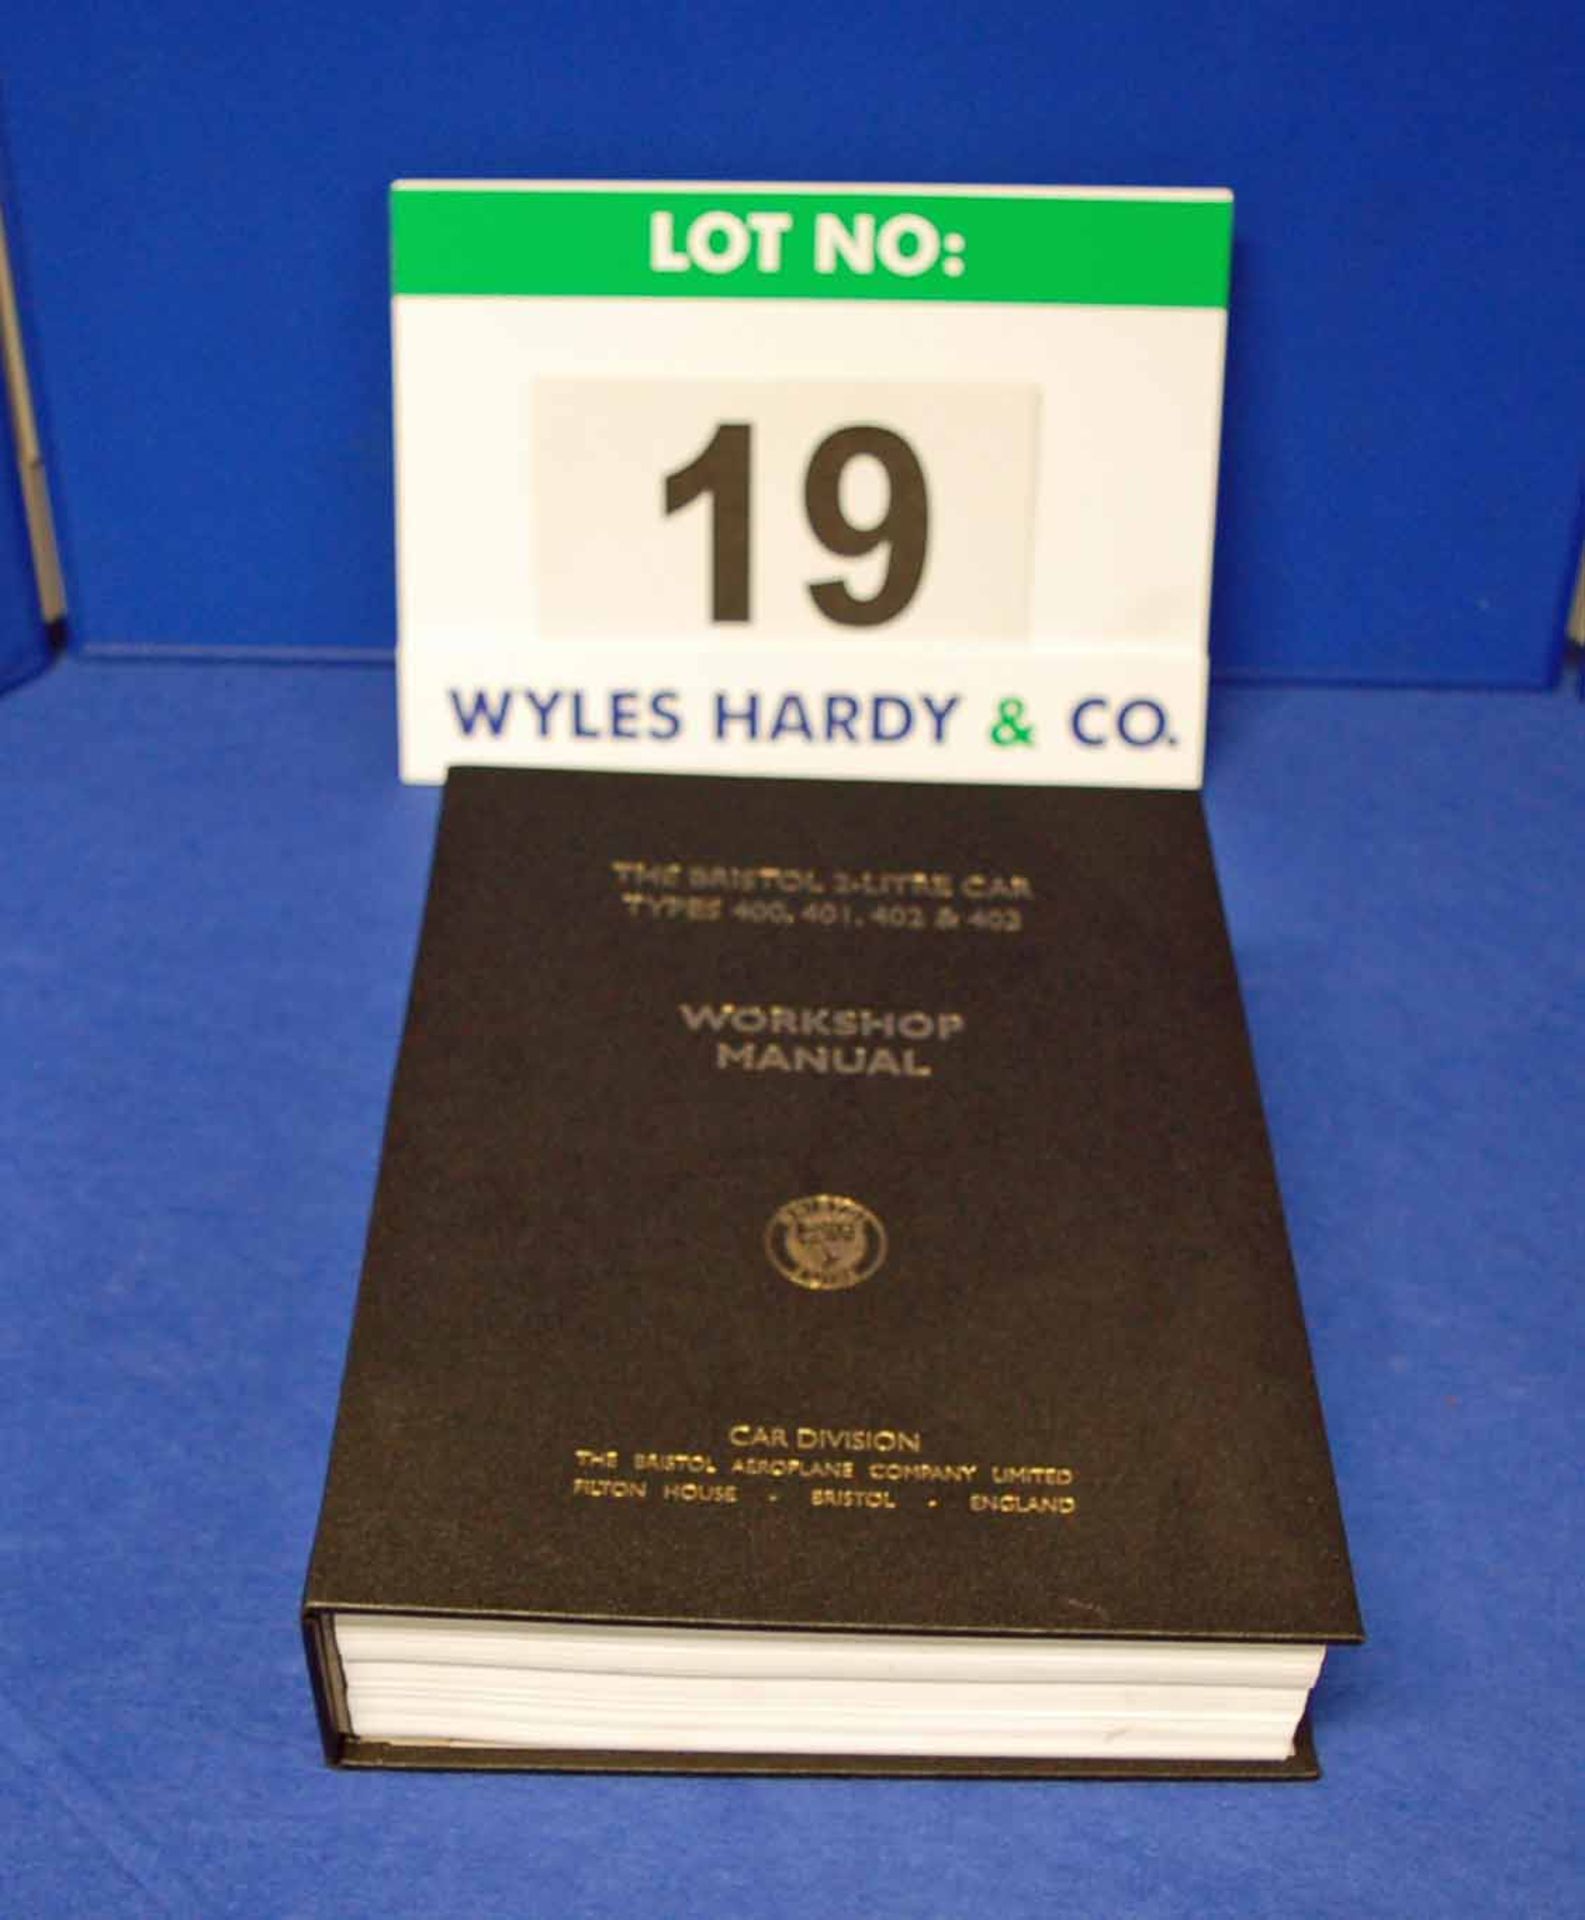 A Copy of The Bristol 2-Litre Types 400, 401, 402 and 403 Workshop Manual (New/Unused)